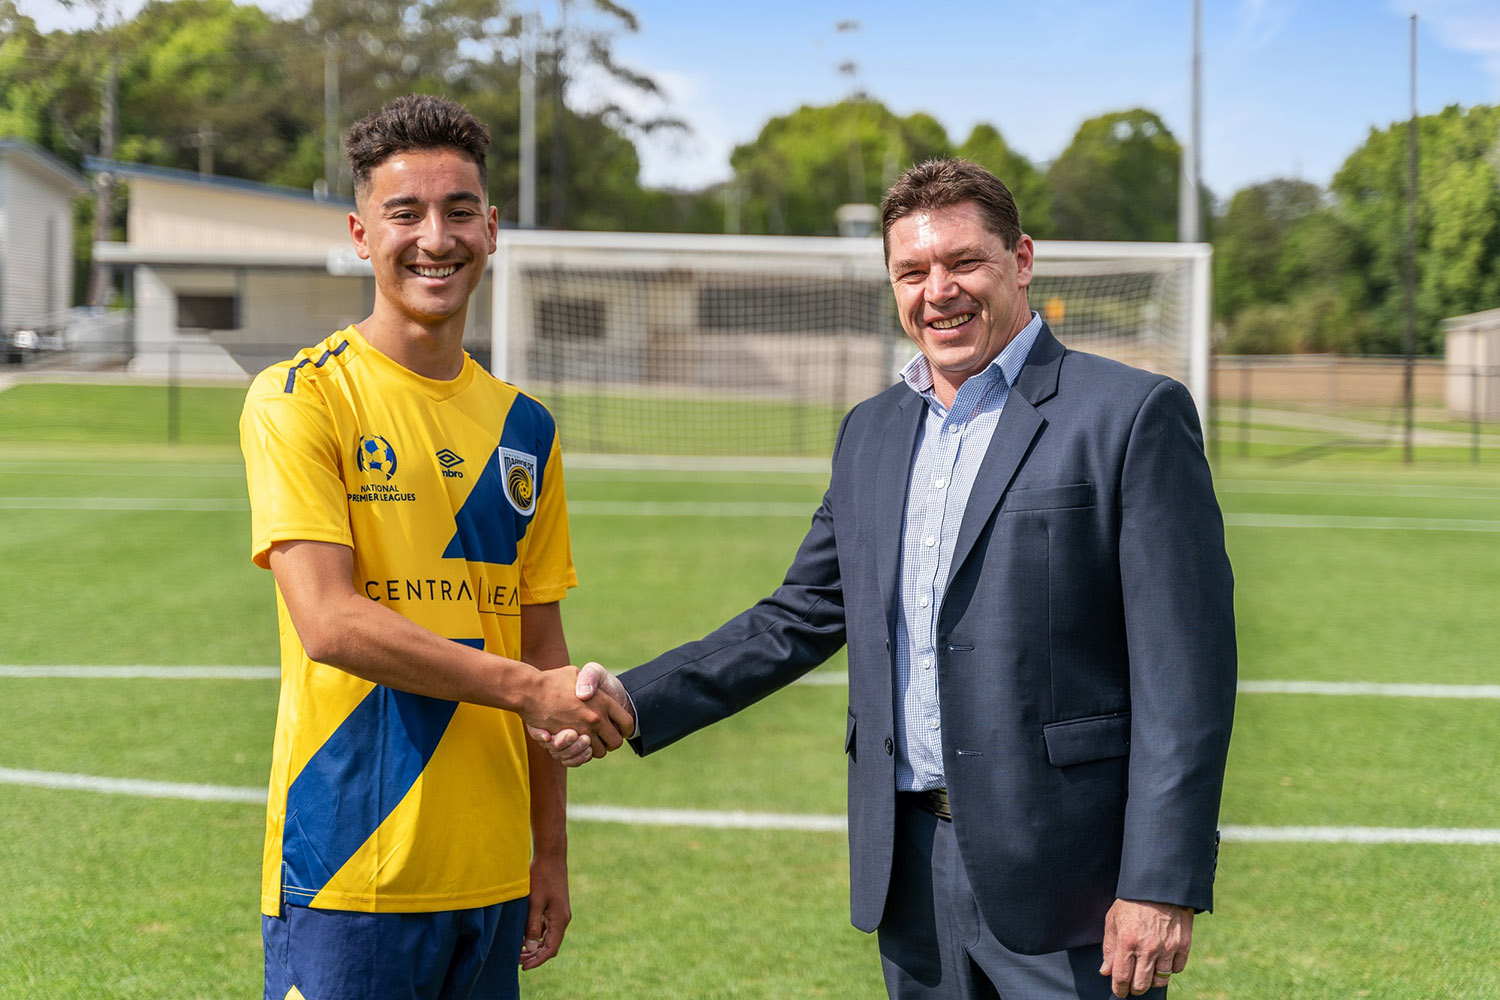 Central Real has partnered with the Mariners Academy